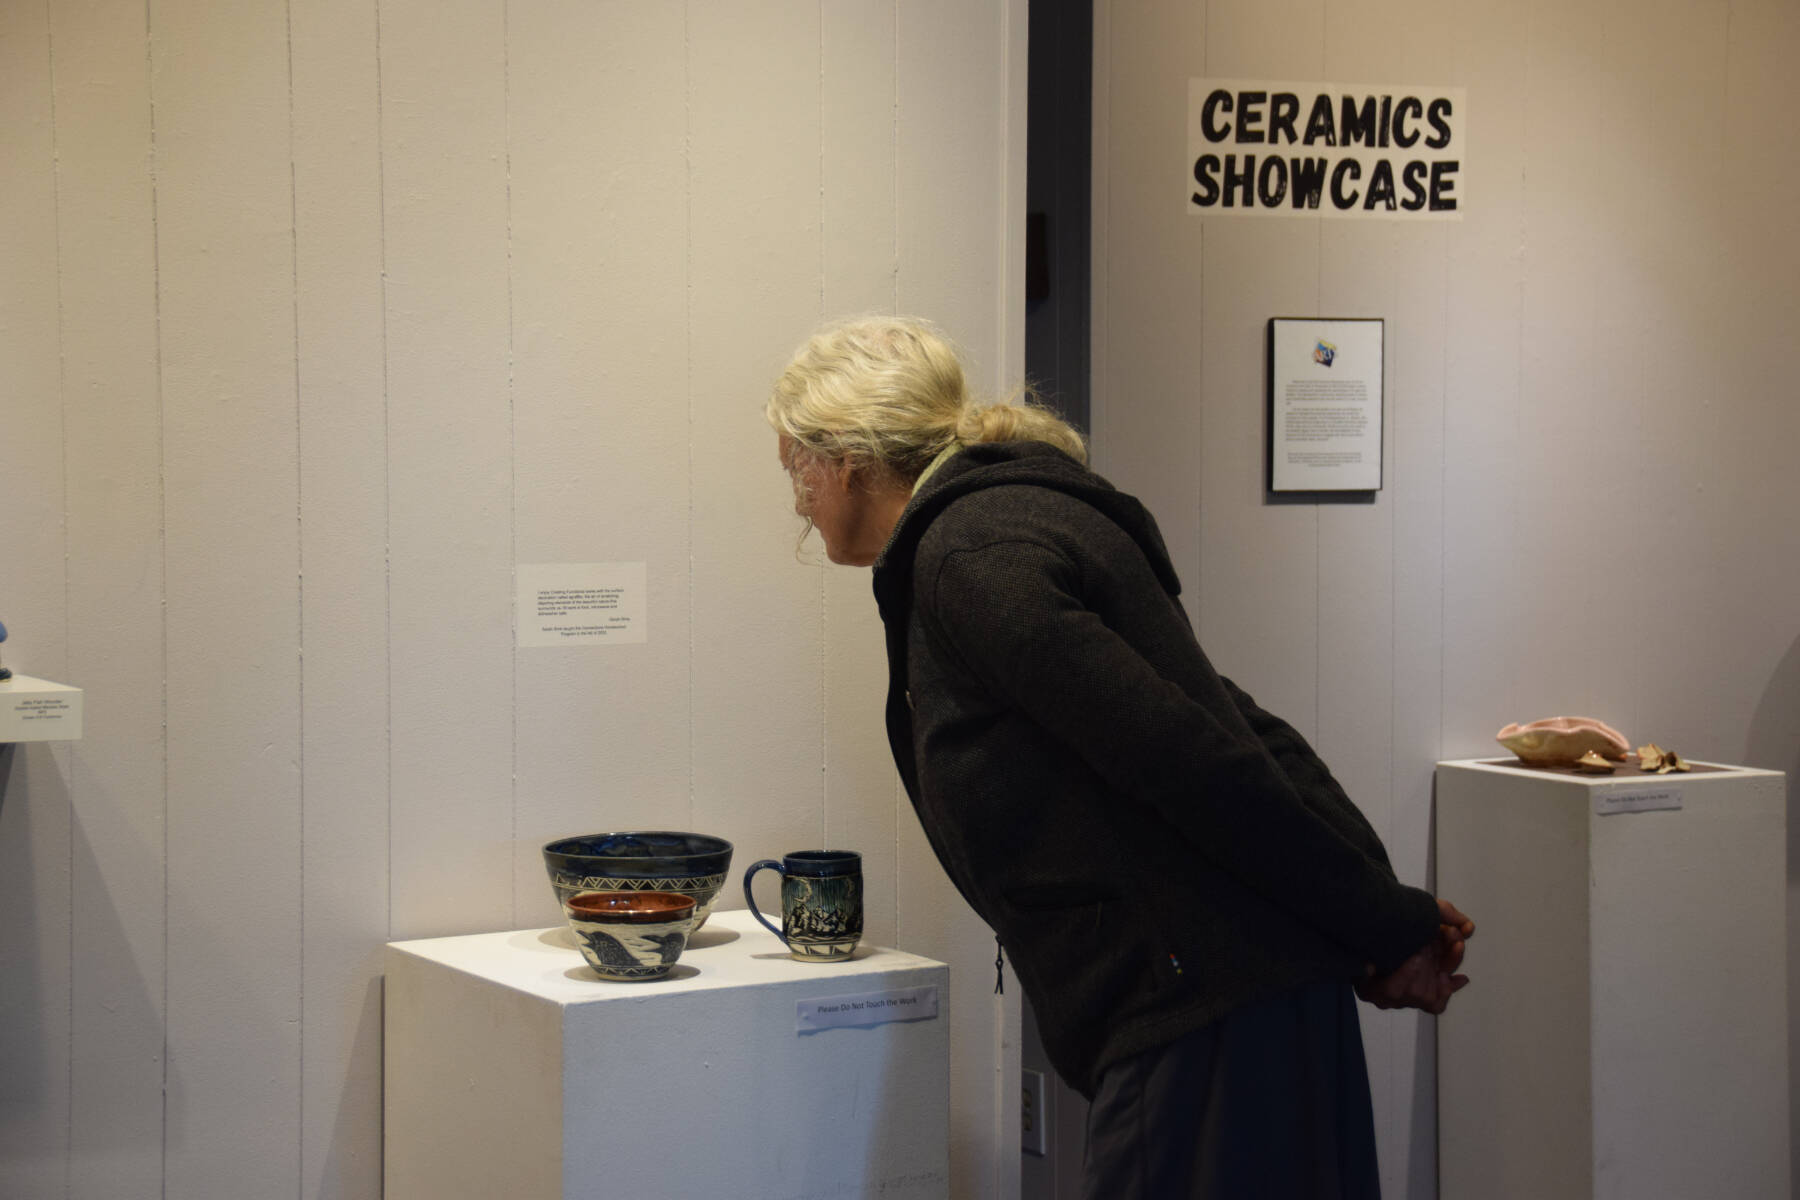 A community member peruses the ceramics on display at Homer Council on the Arts’ First Friday showcase on Sept. 1 in Homer, Alaska. (Delcenia Cosman/Homer News)